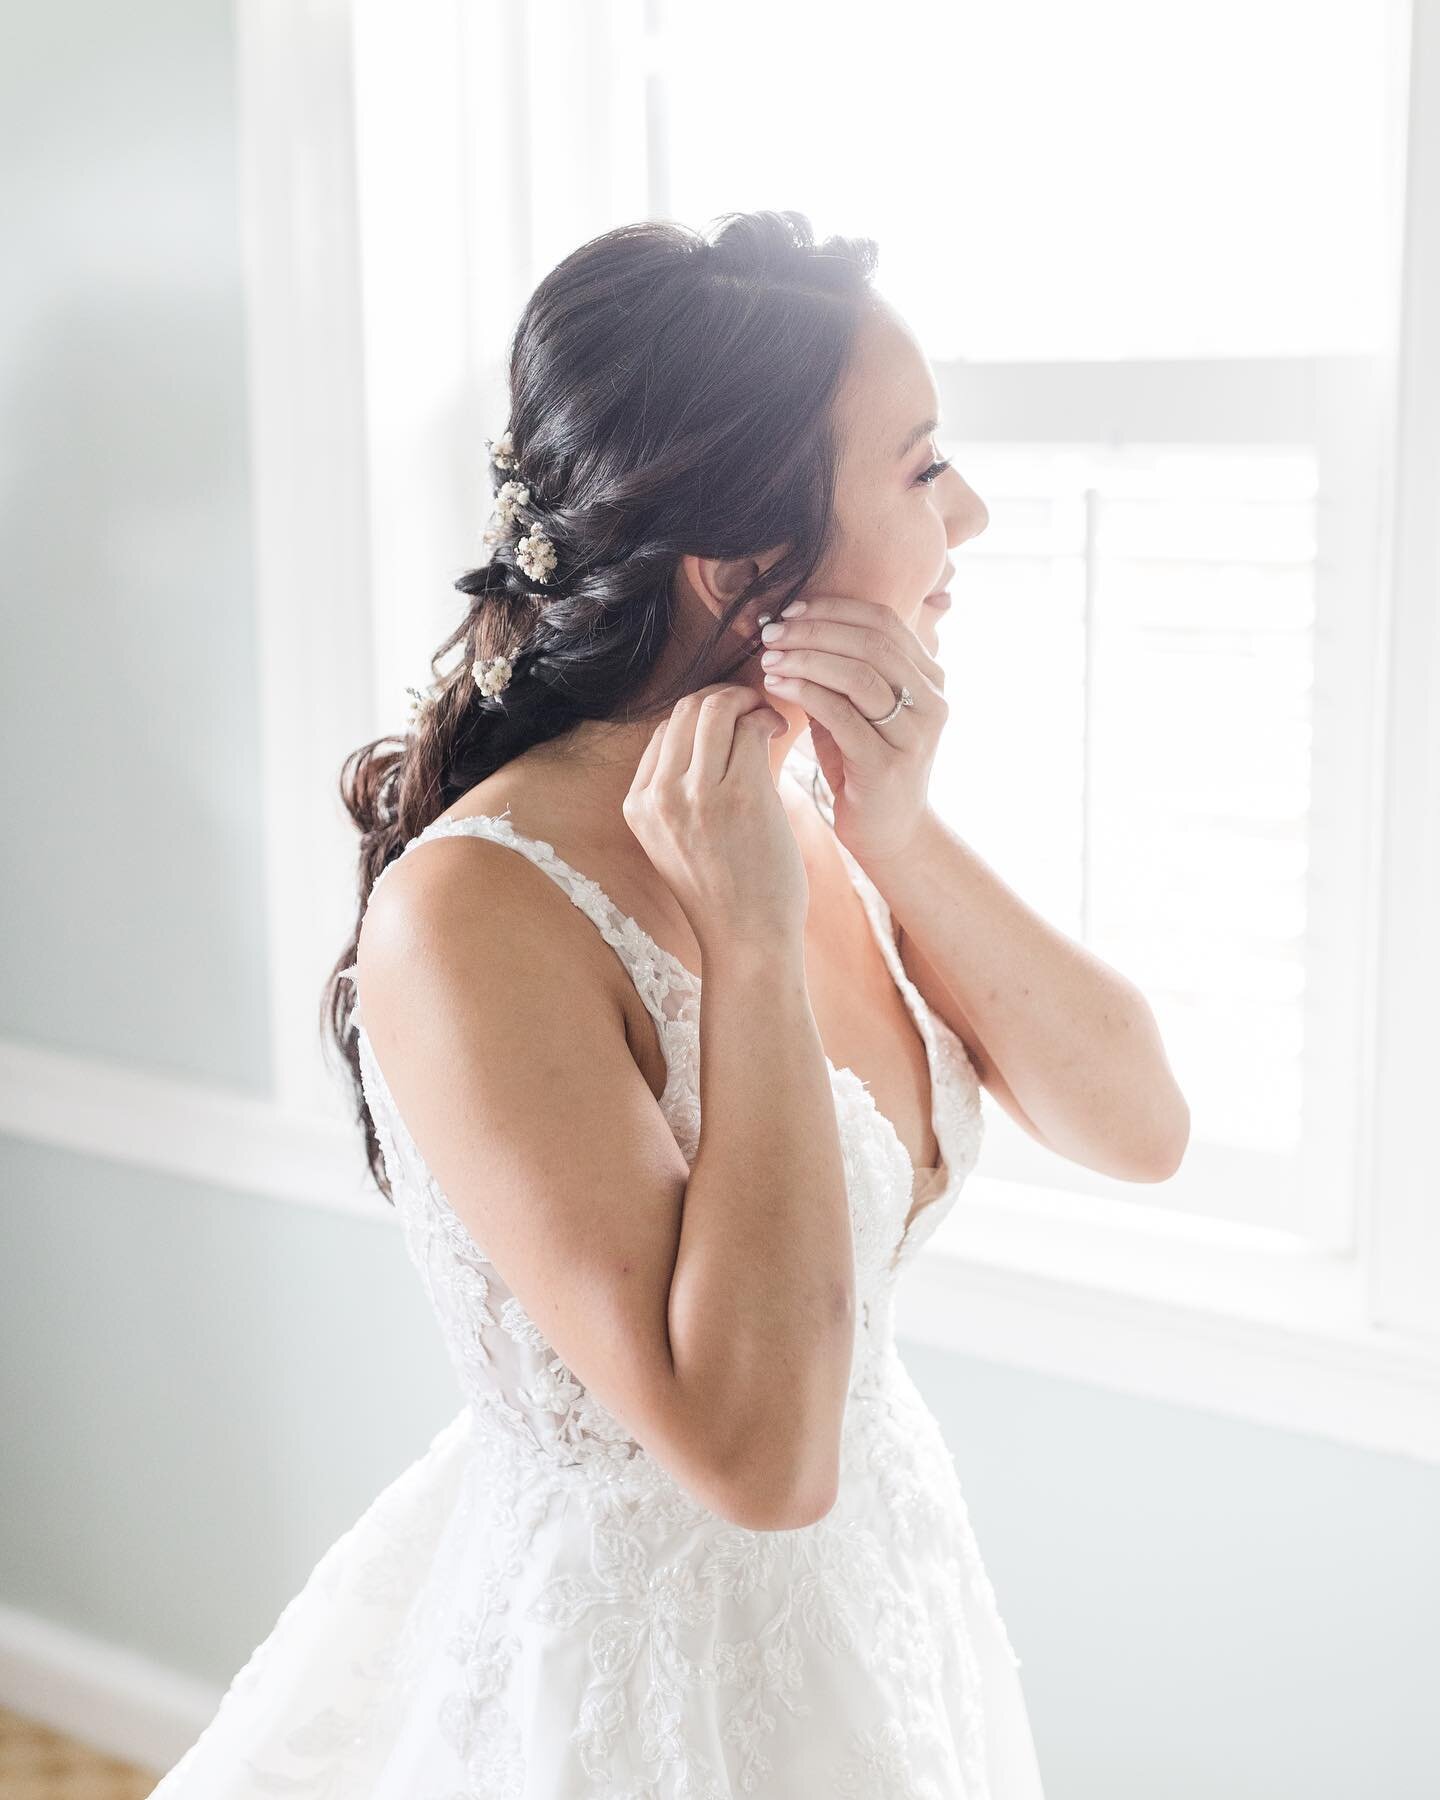 Having one window in your getting ready room makes all the difference! Leeah, you are a gorgeous bride 🔥